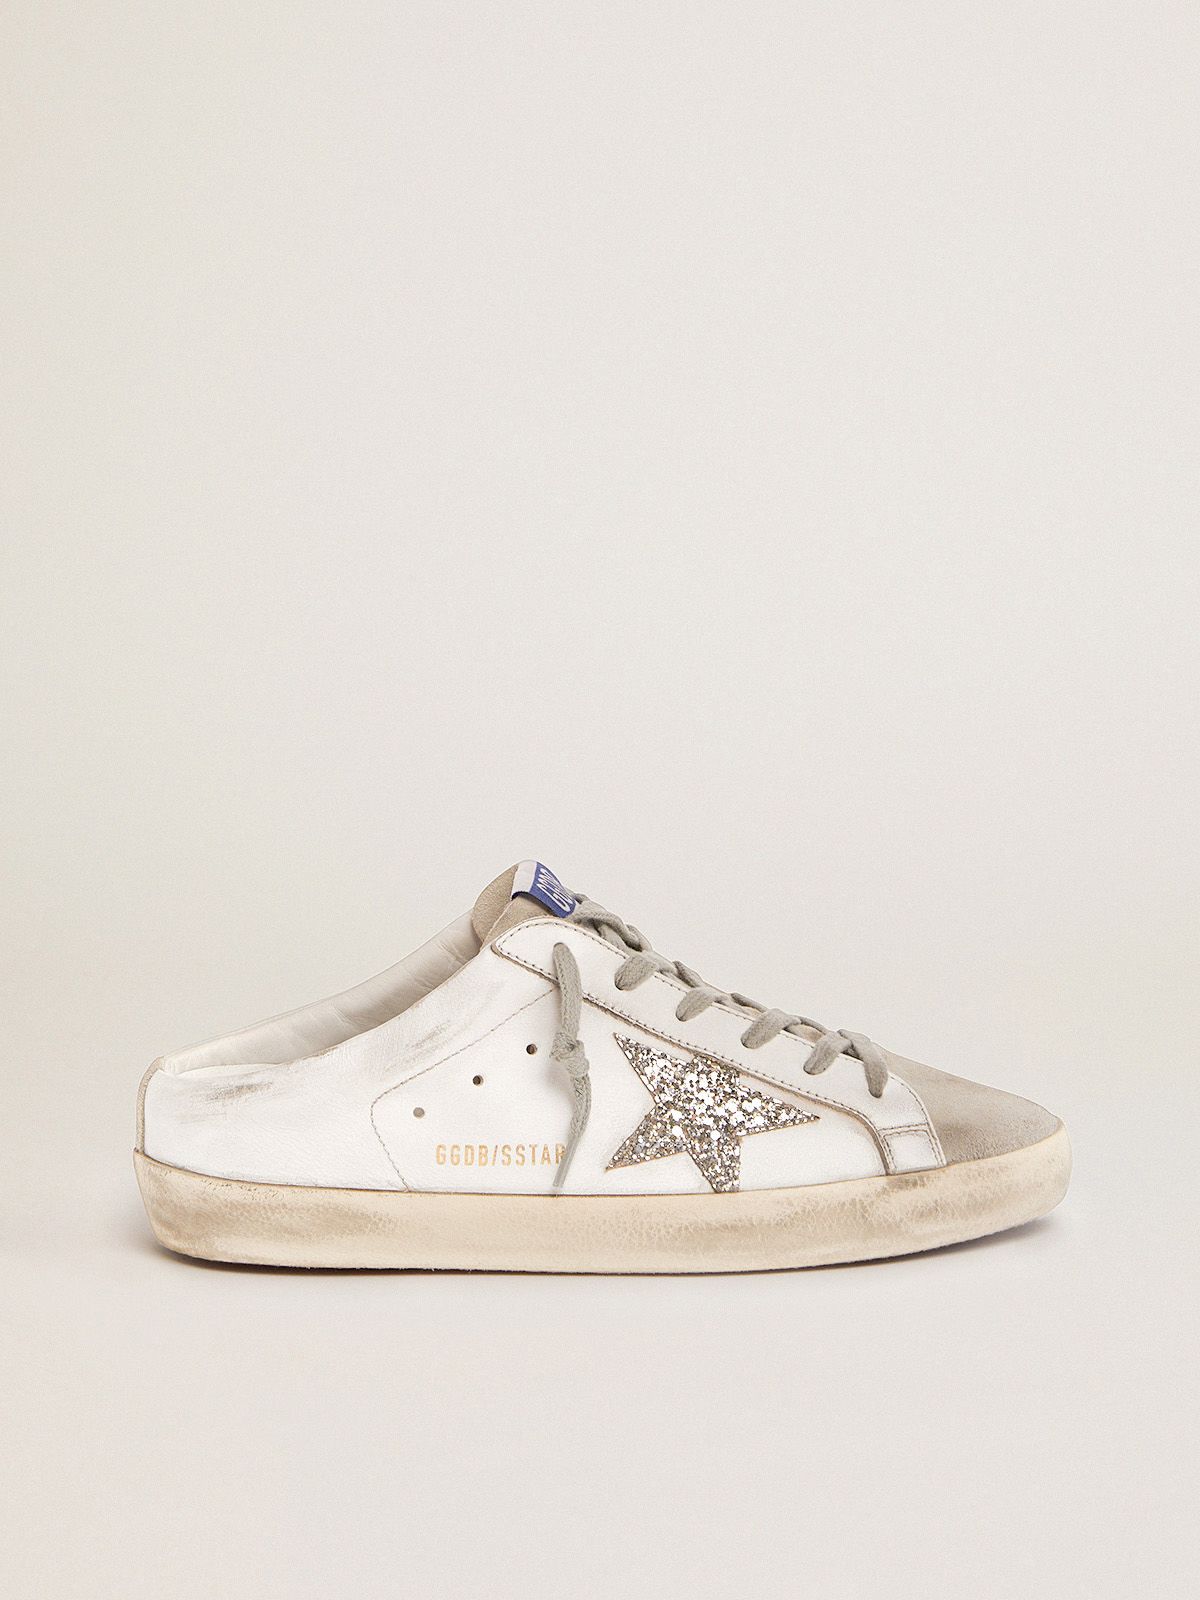 Super-Star Sabots in white leather and gray suede with silver glitter star